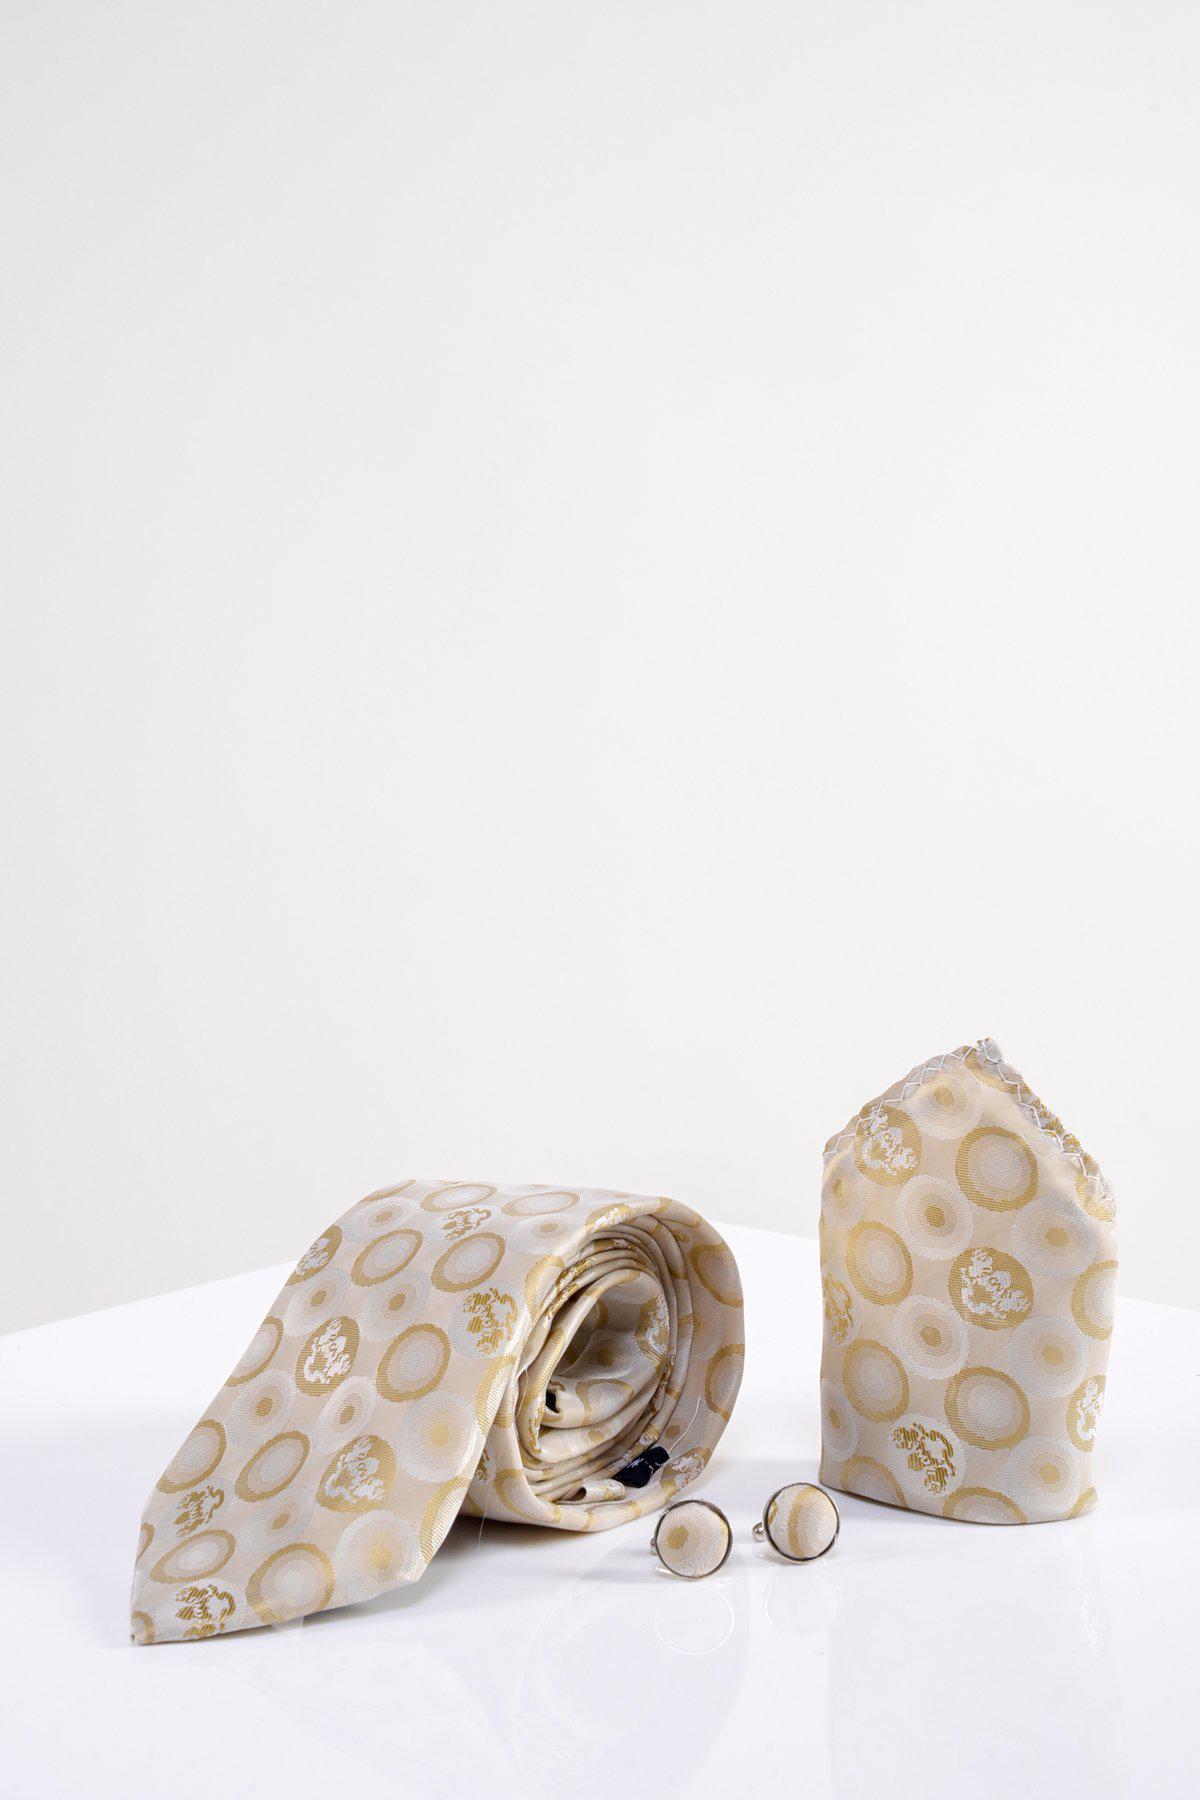 BUBBLES - Stone Circle Print Tie, Cufflink and Pocket Square Set